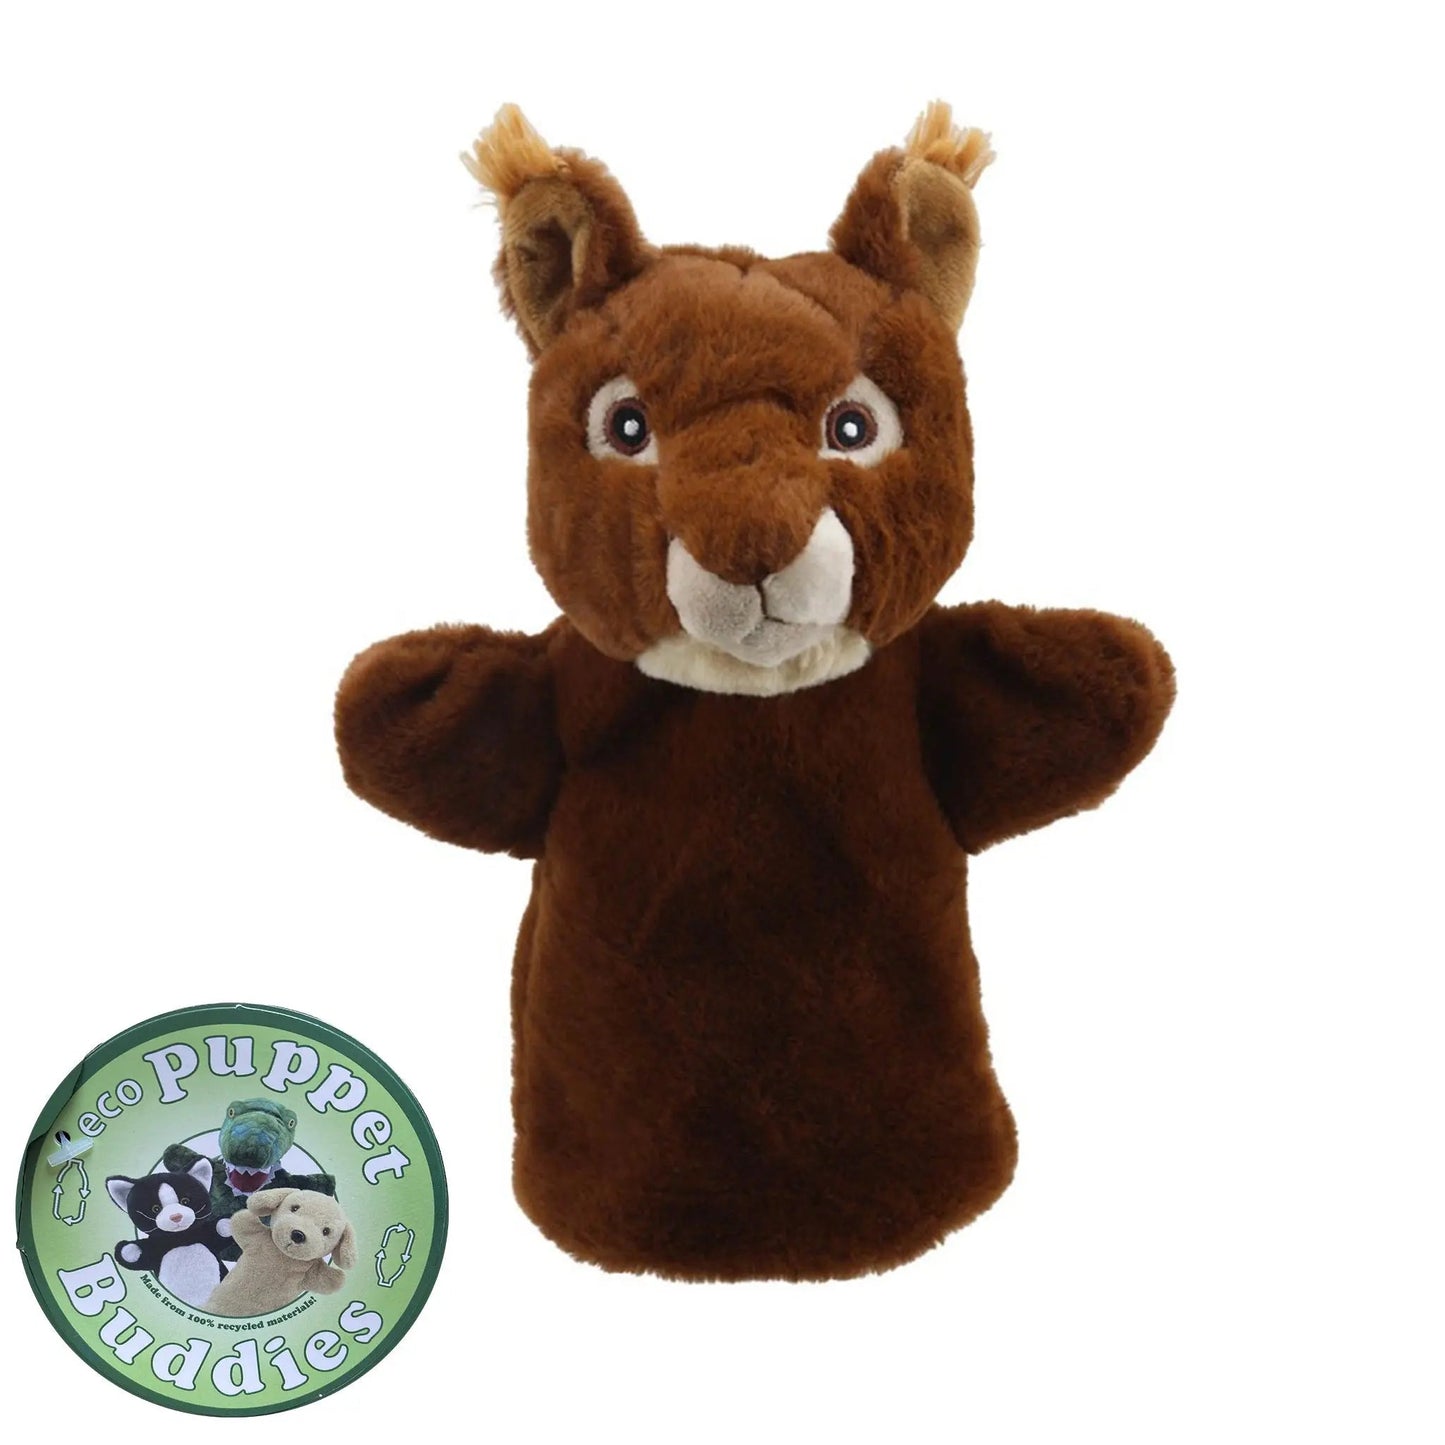 Squirrel Eco Puppet Buddies Hand Puppet - The Puppet Company - The Forgotten Toy Shop